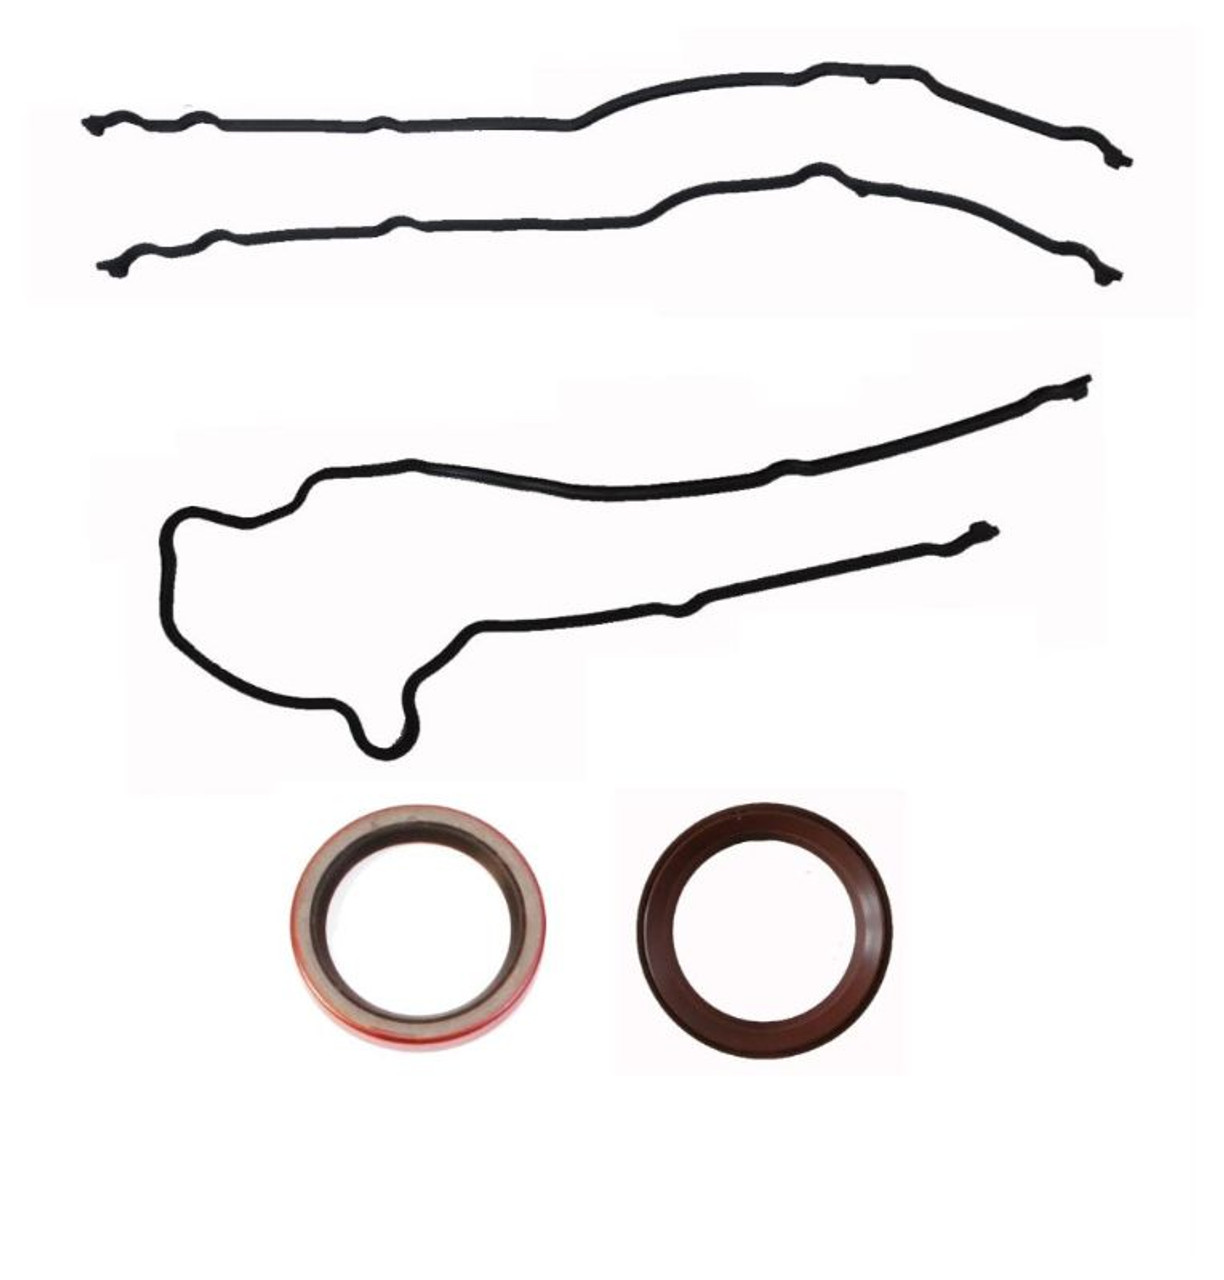 1998 Ford Expedition 5.4L Engine Timing Cover Gasket Set TCF330-A -32